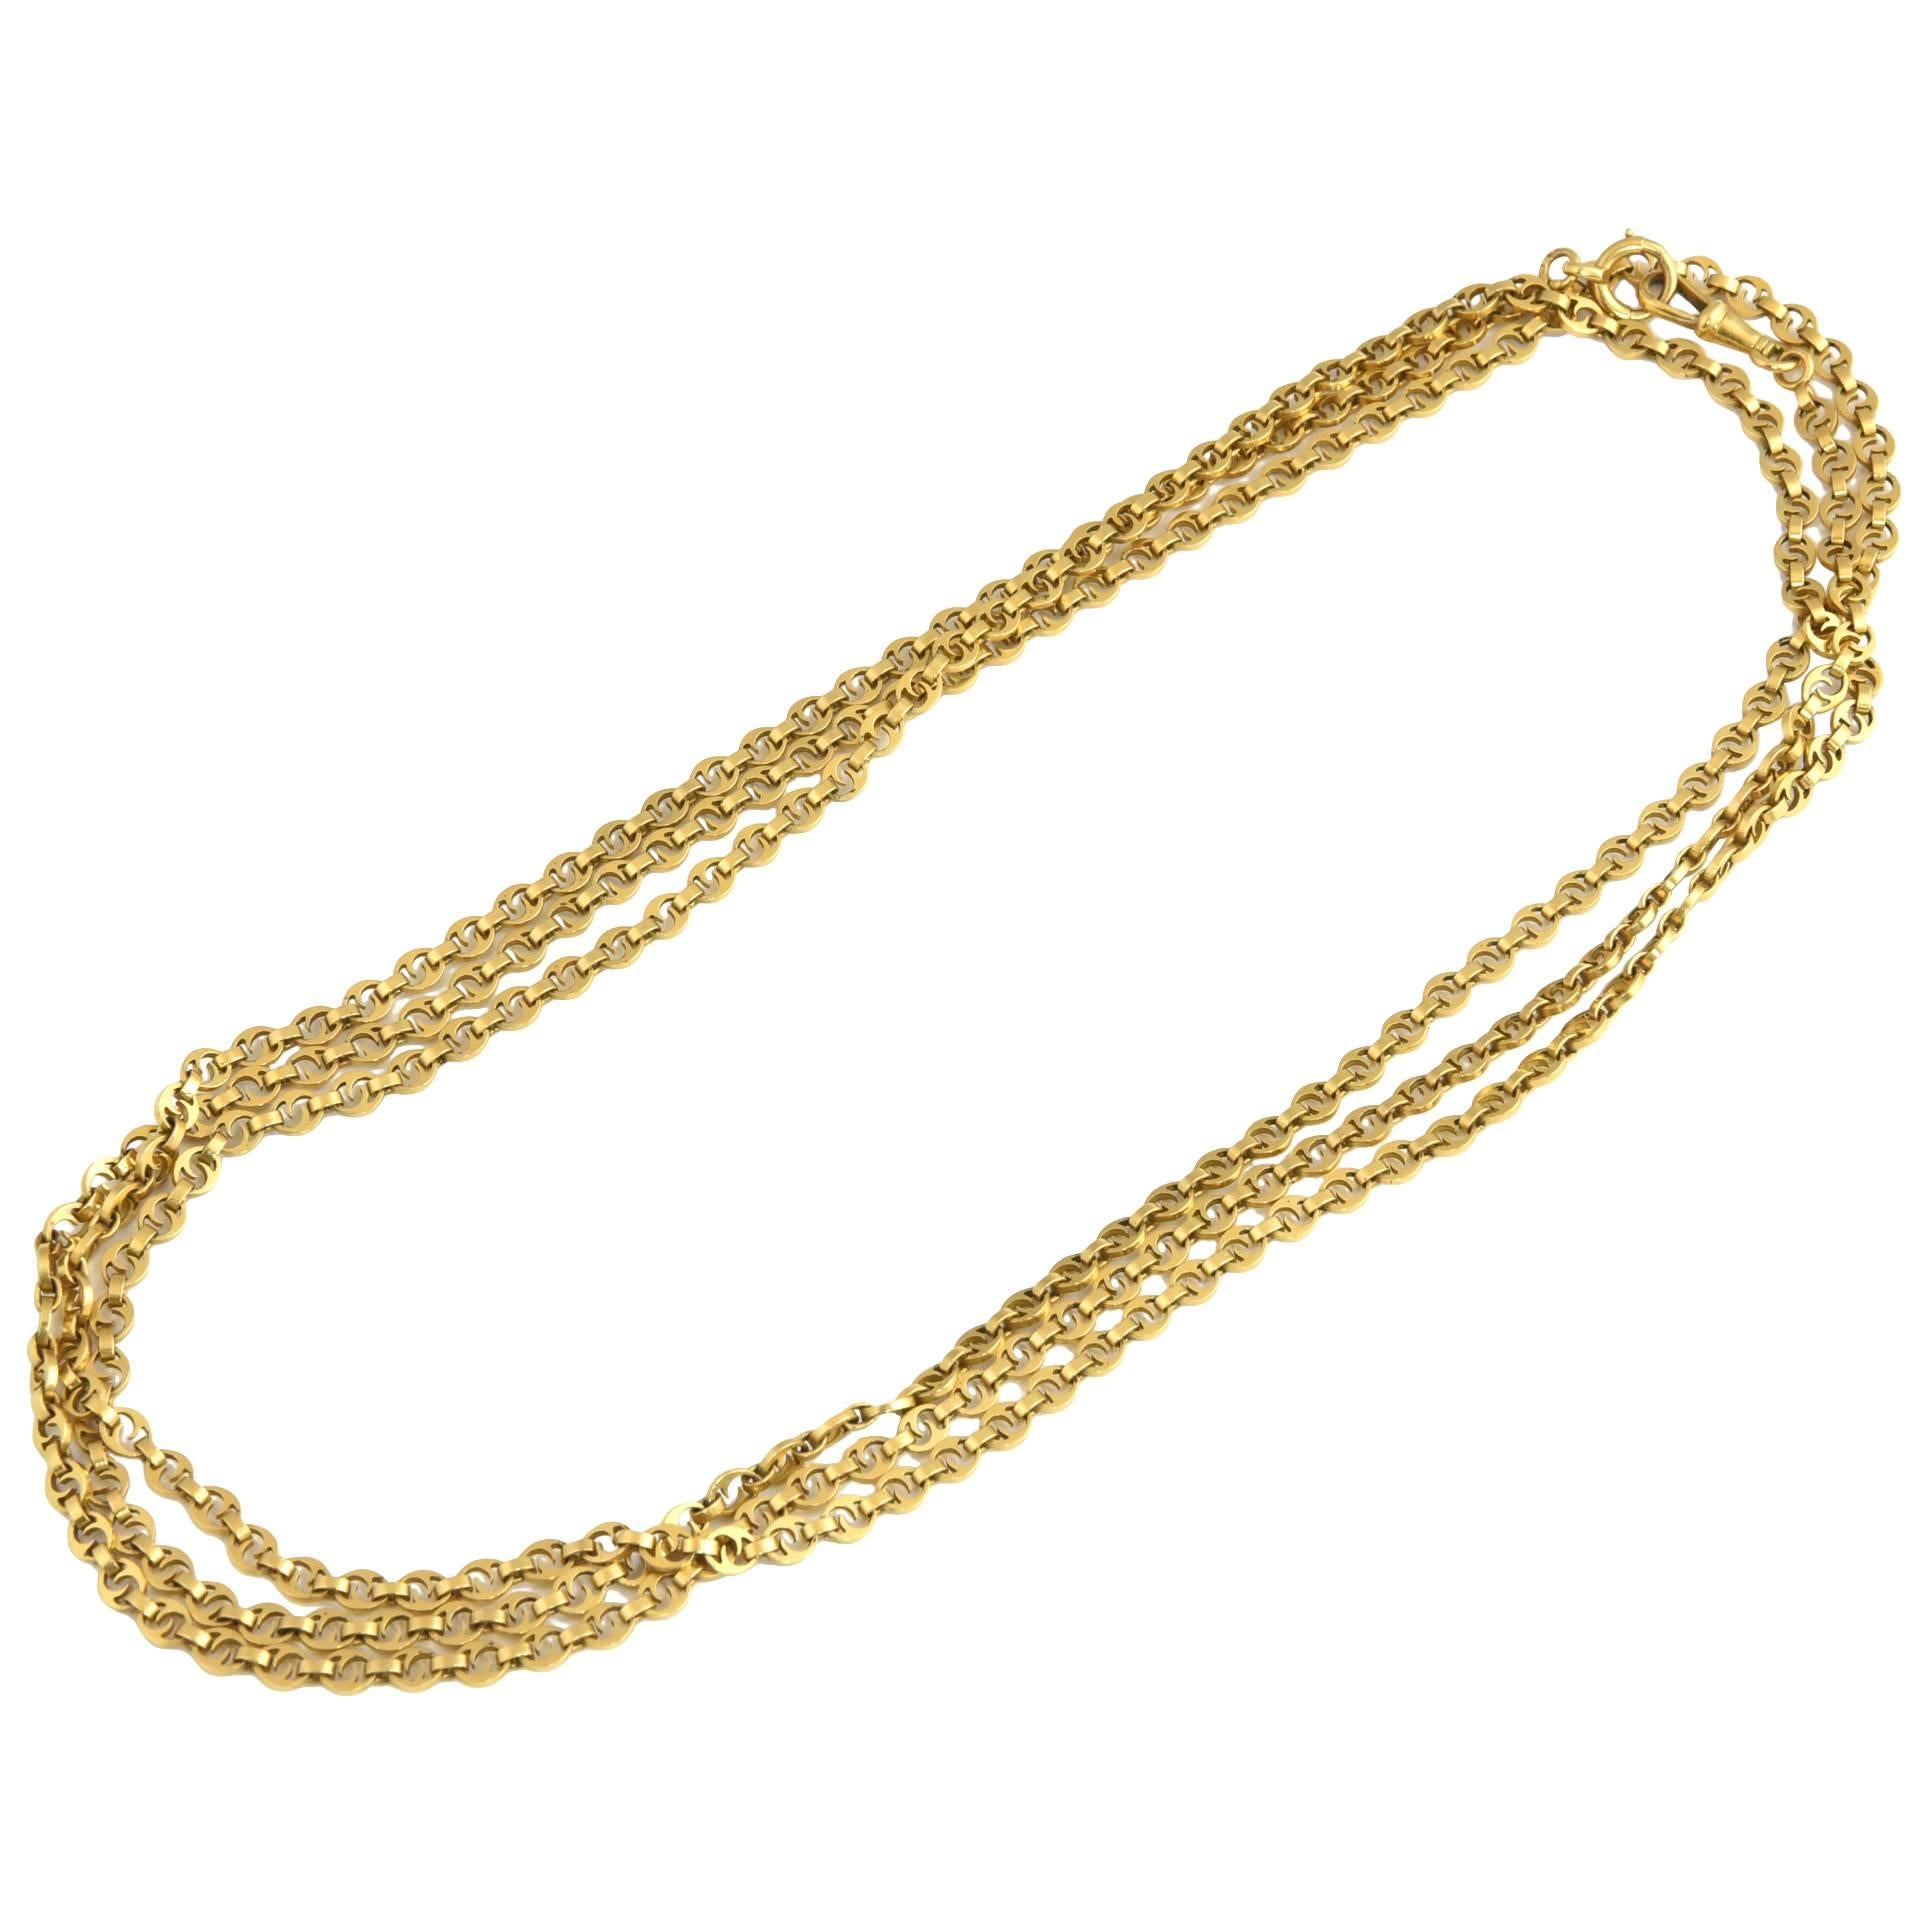 Exquisite Very Long Victorian 62" Gold Watch Chain Necklace from Switzerland